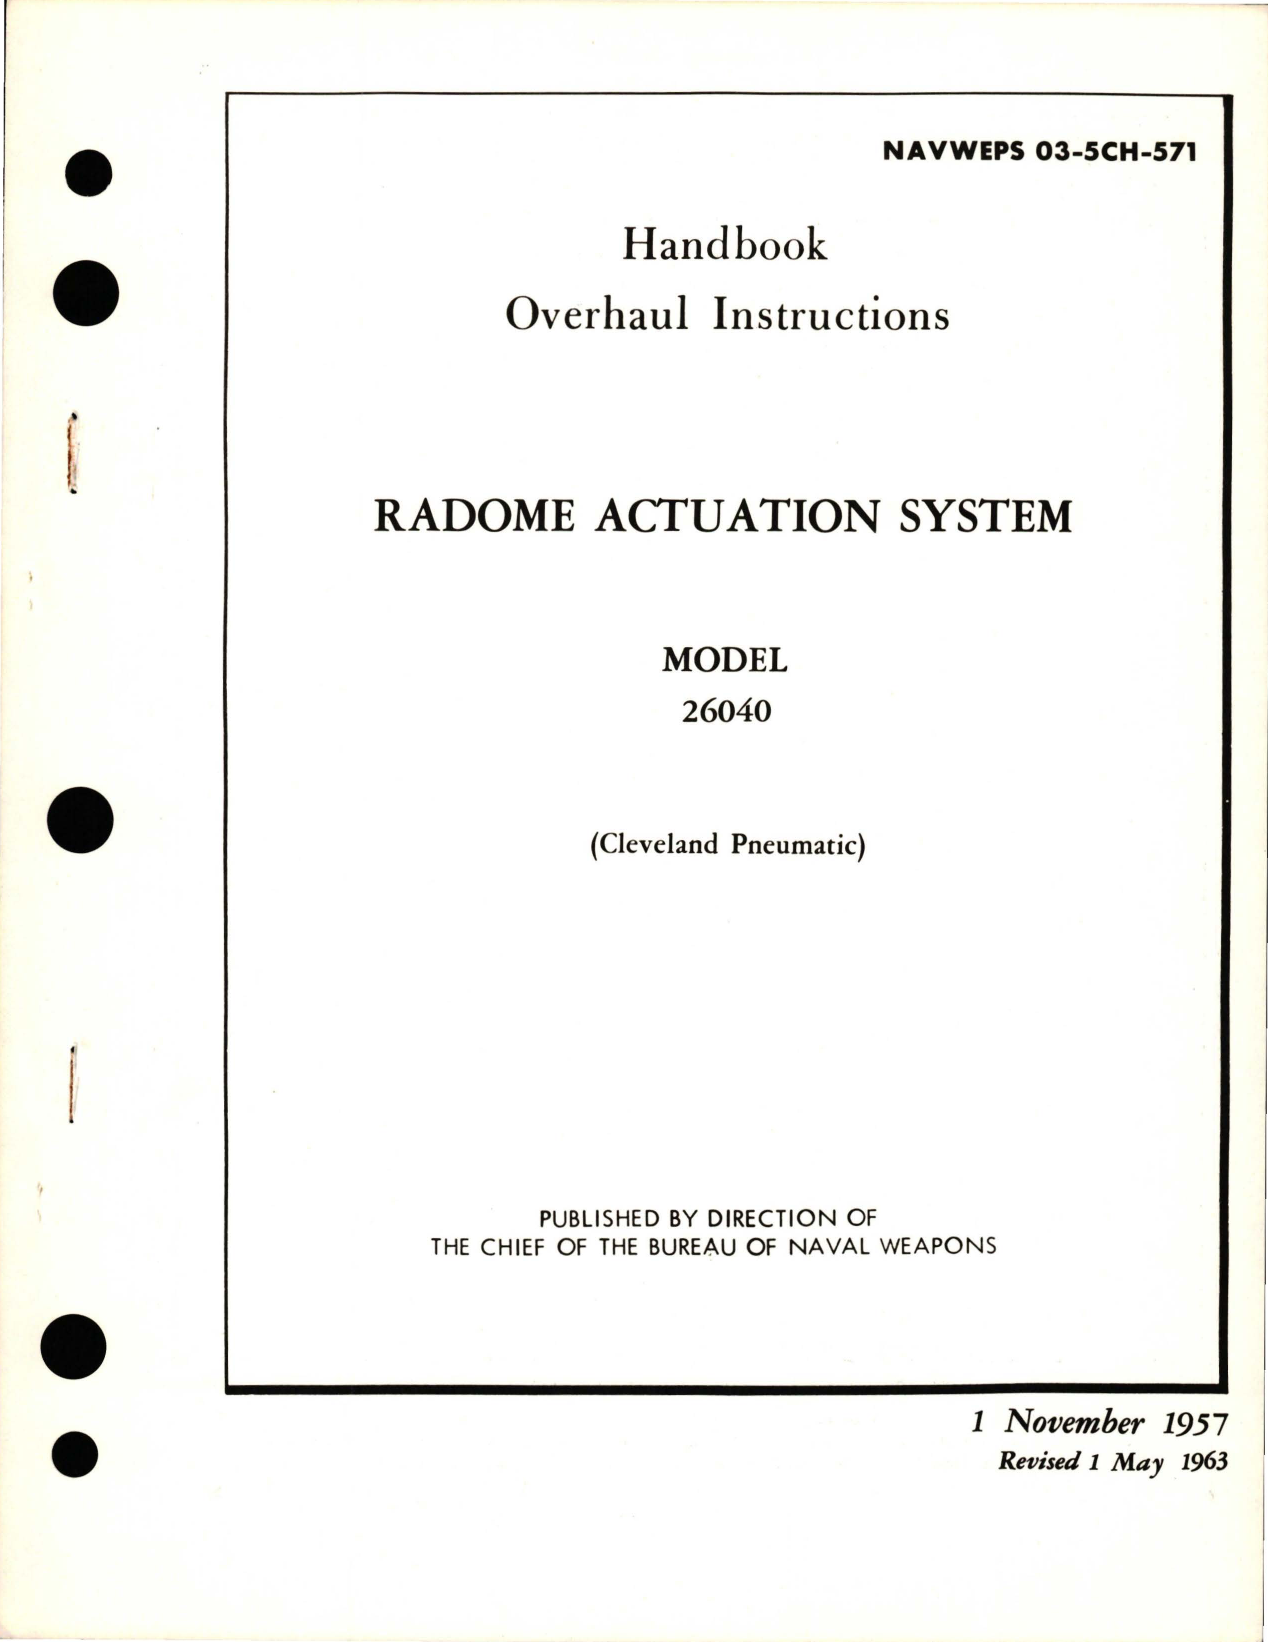 Sample page 1 from AirCorps Library document: Overhaul Instructions for Radome Actuation System - Model 26040 